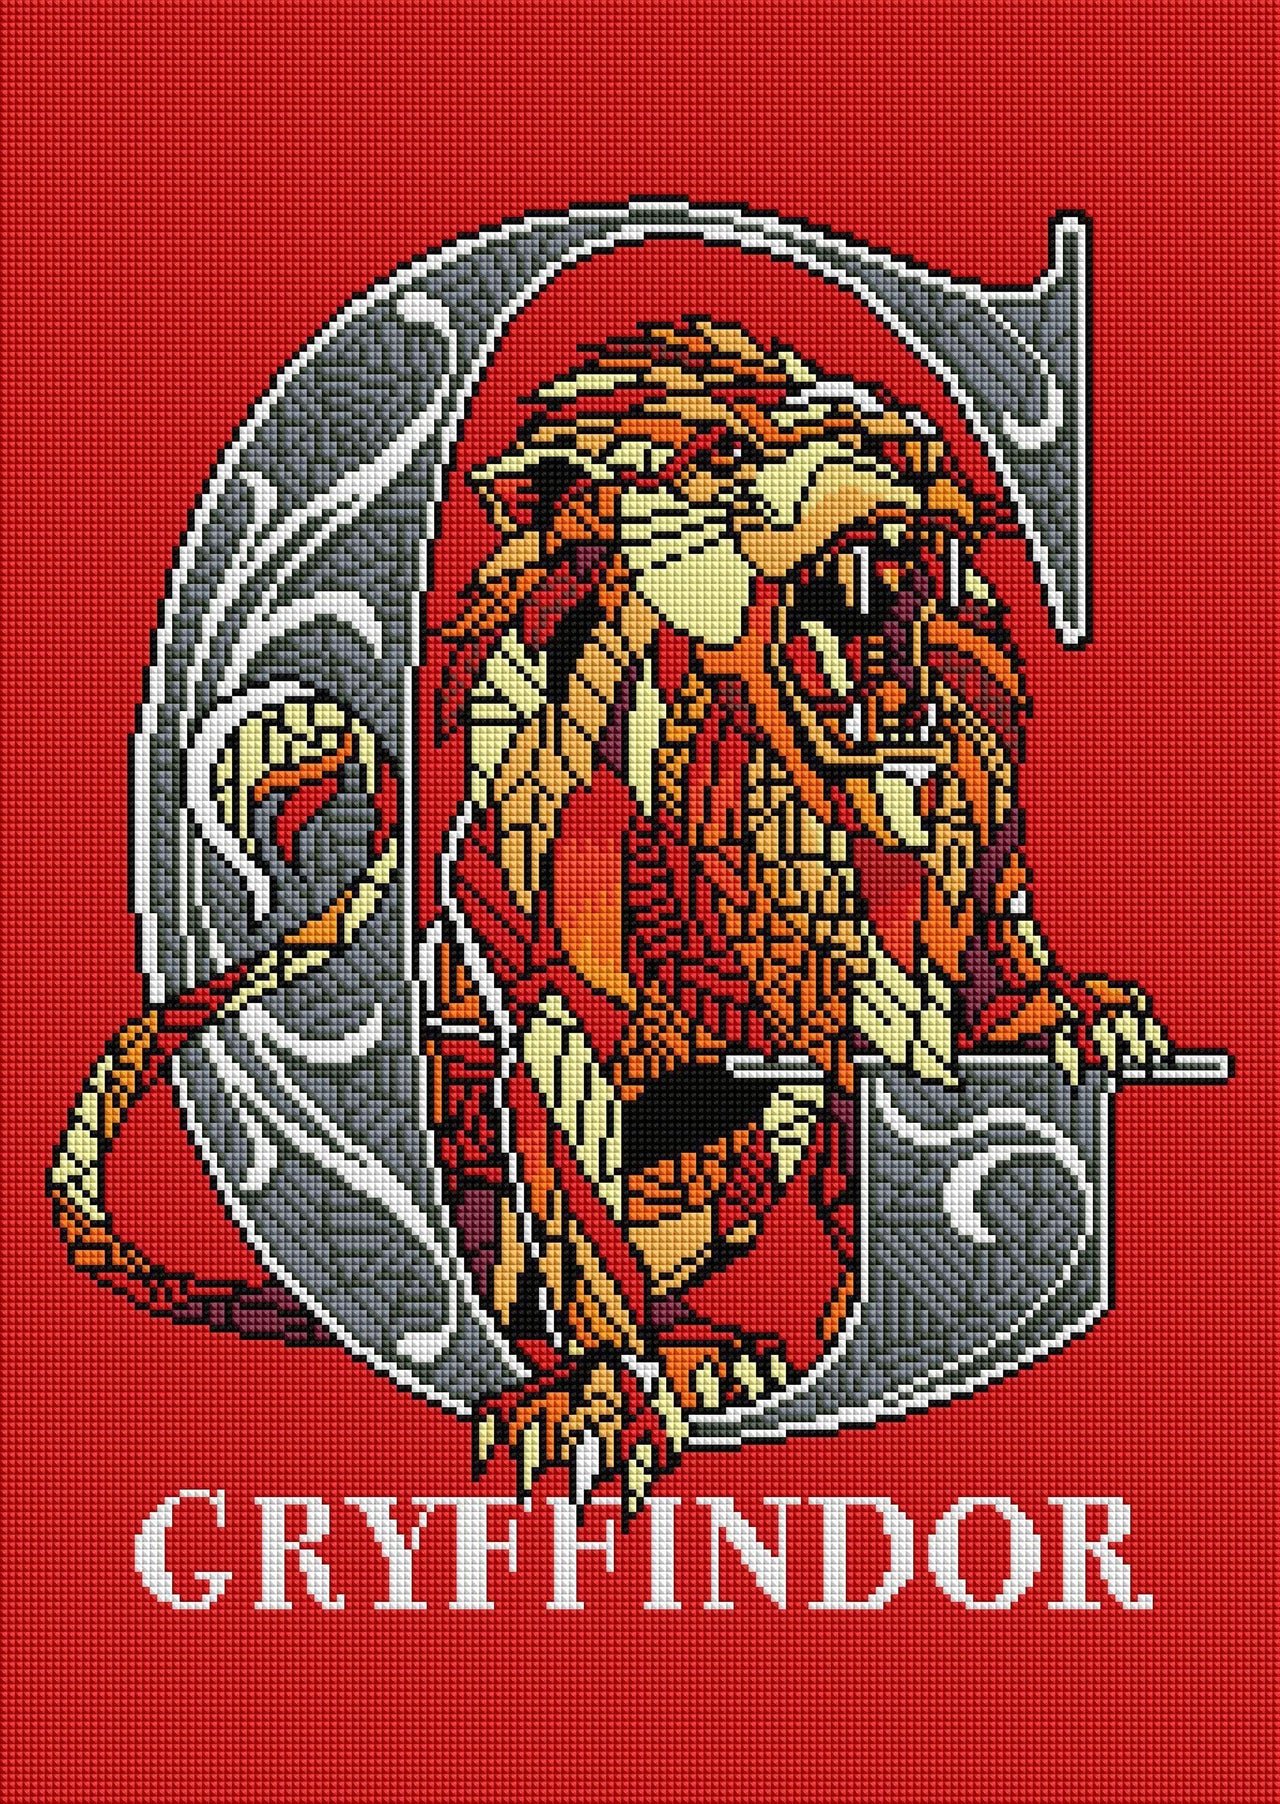 Diamond Painting Gryffindor™ Crest - Stand Together - AMZ 17" x 24″ (43cm x 61cm) / Square With 14 Colors Including 3 ABs / 41,211